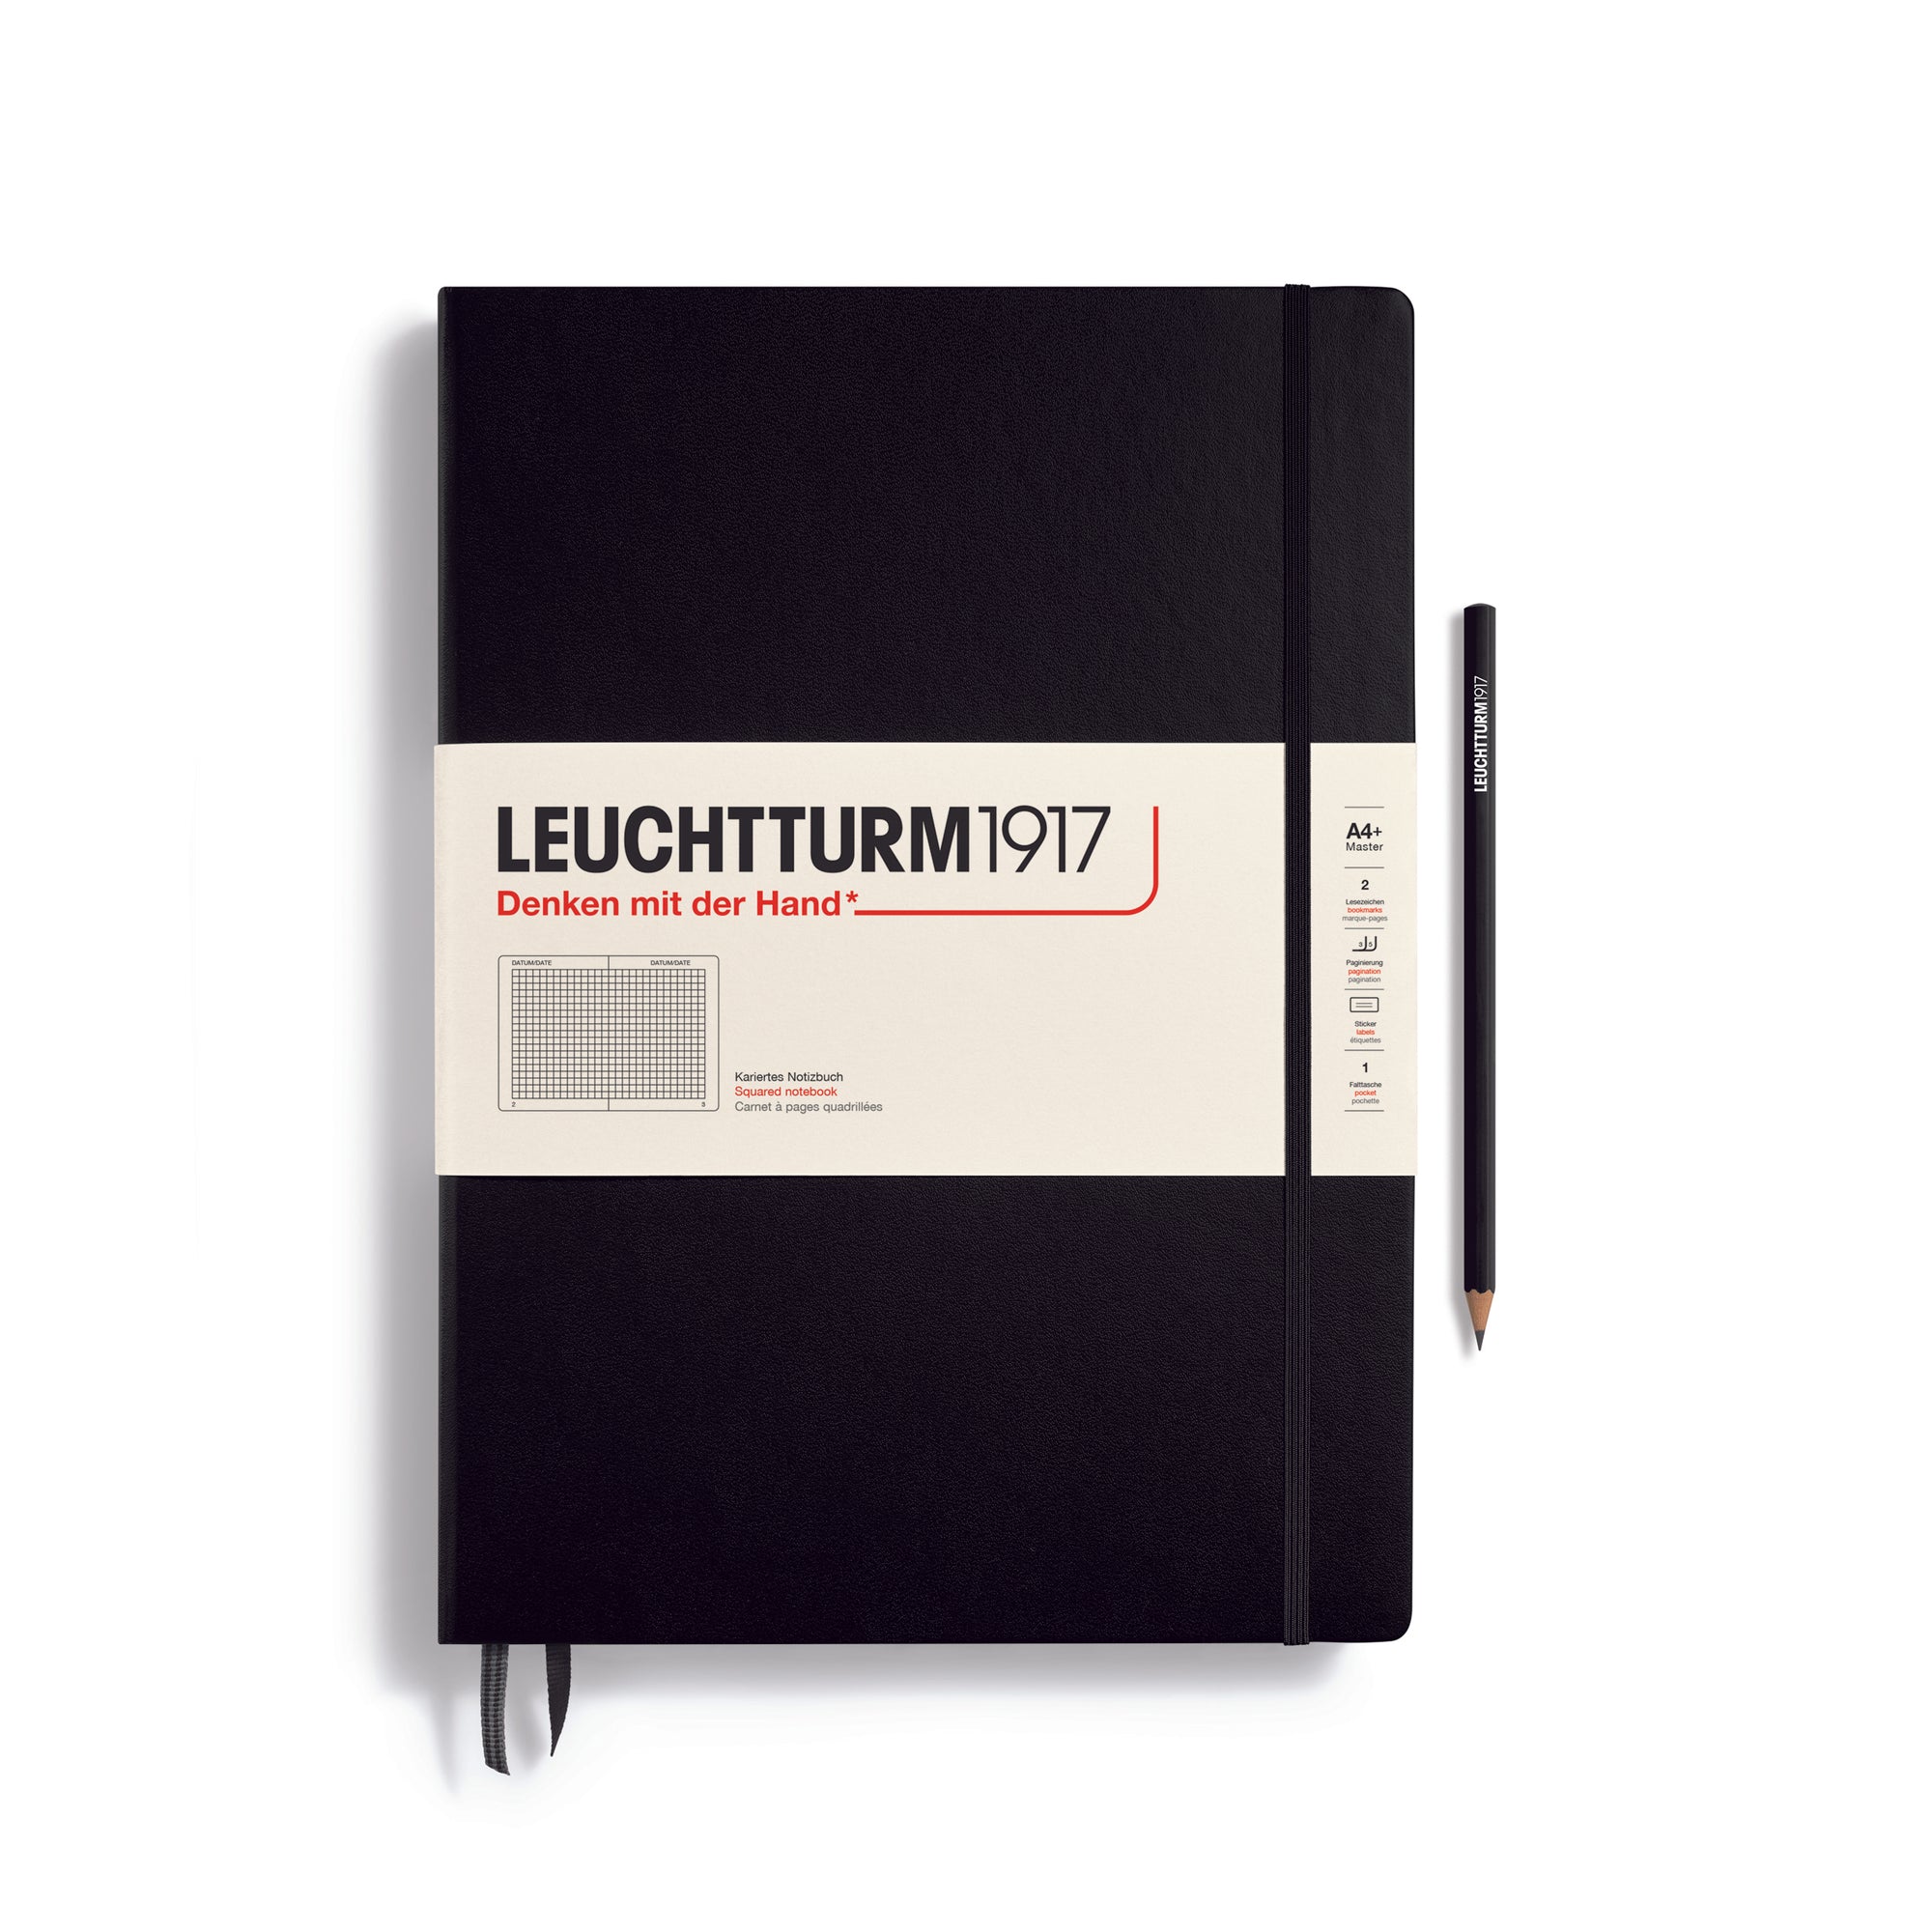 A large black notebook with a white paper band around it with the logo of the brand Leuchtturm1917. Below this is an image of the page ruling inside - in this case, squared. It has two page marker ribbons showing at the bottom near the binding and an elastic notebook closure holding it neatly together. A black Leuchtturm pencil is shown at the side of the book.